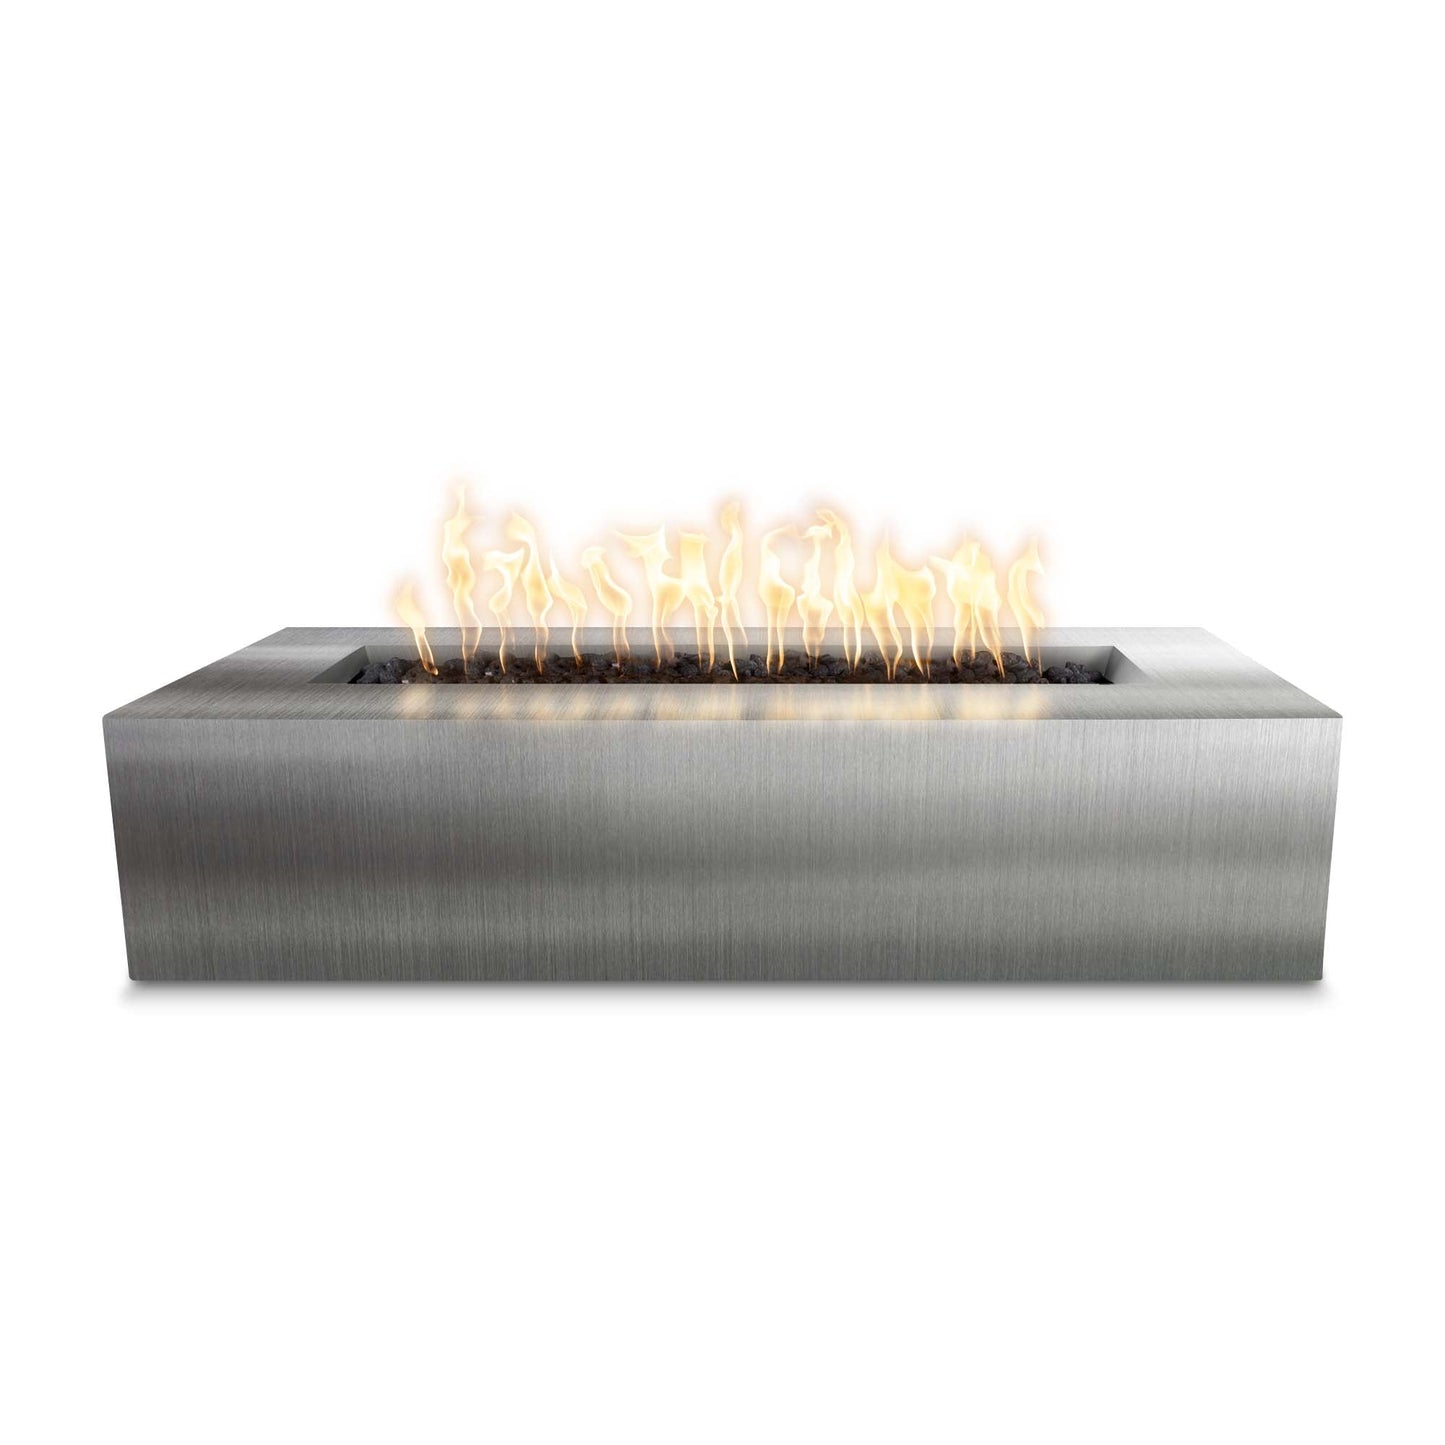 The Outdoor Plus Rectangular Regal 60" Corten Steel Liquid Propane Fire Pit with 110V Electronic Ignition